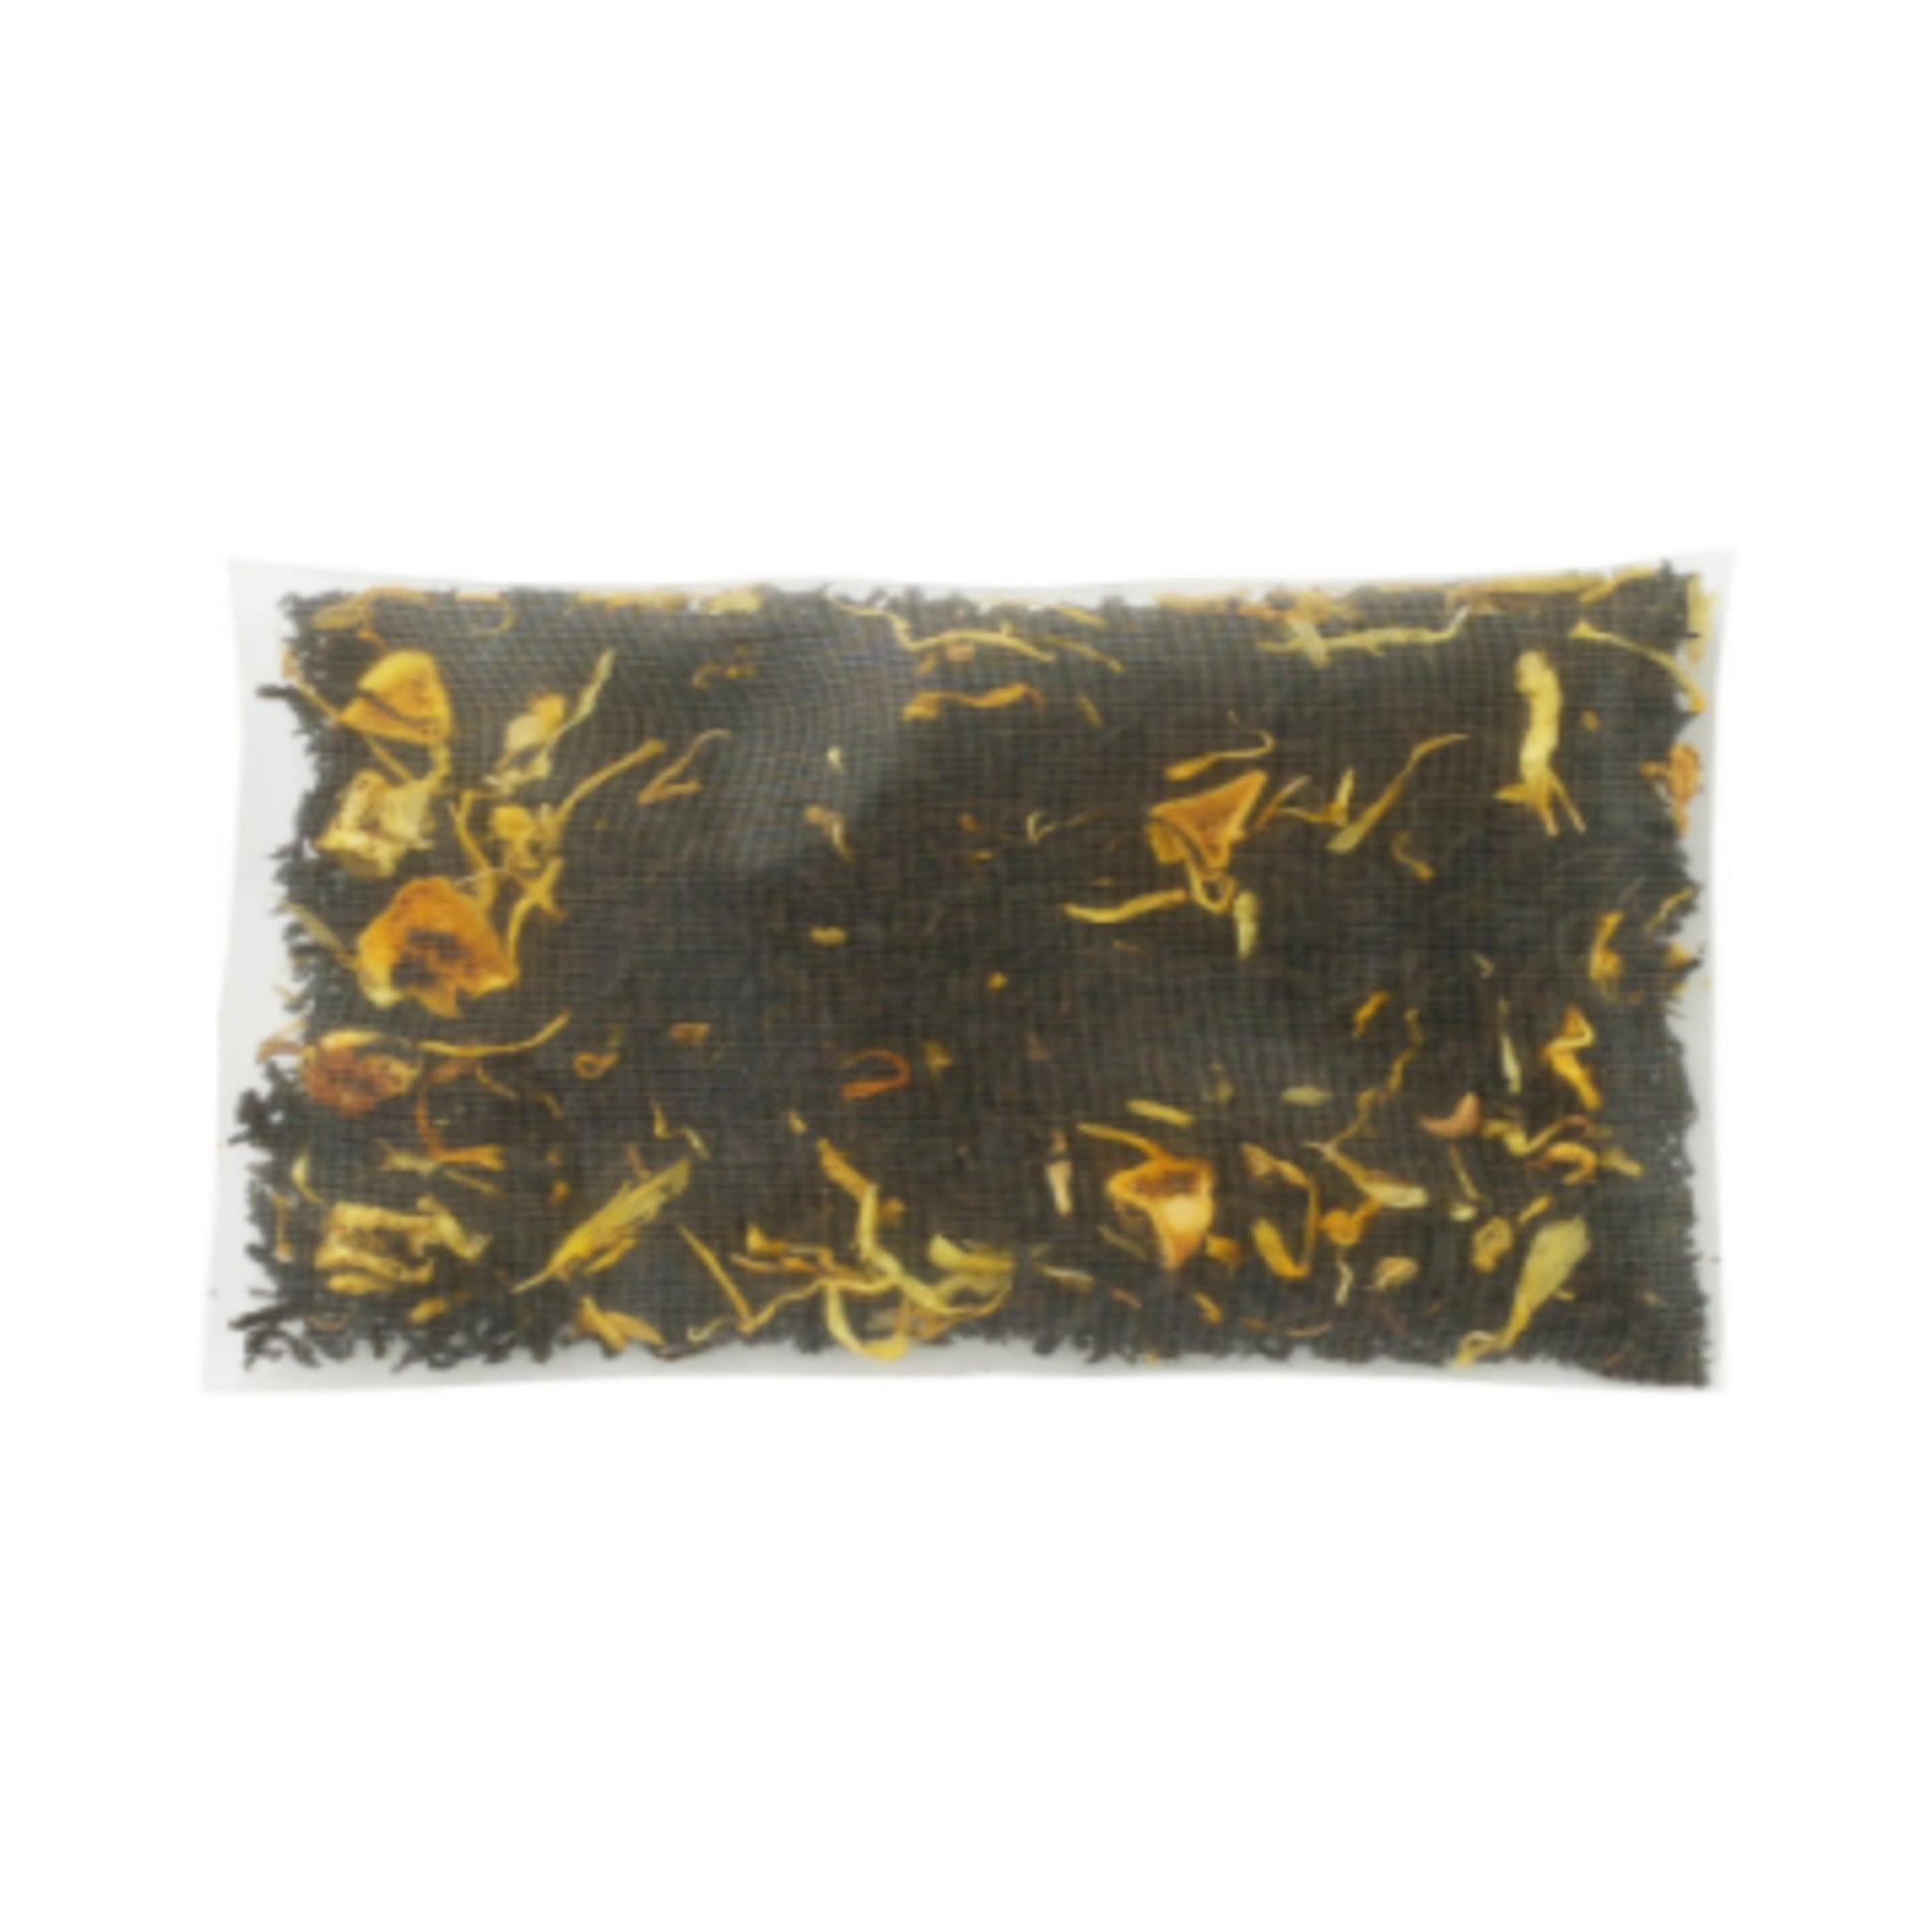 Peach Black Iced Tea Bags, available in quantities of 1, 6 or 12 quart size pouches Tea & Infusions The Grateful Tea Co. 